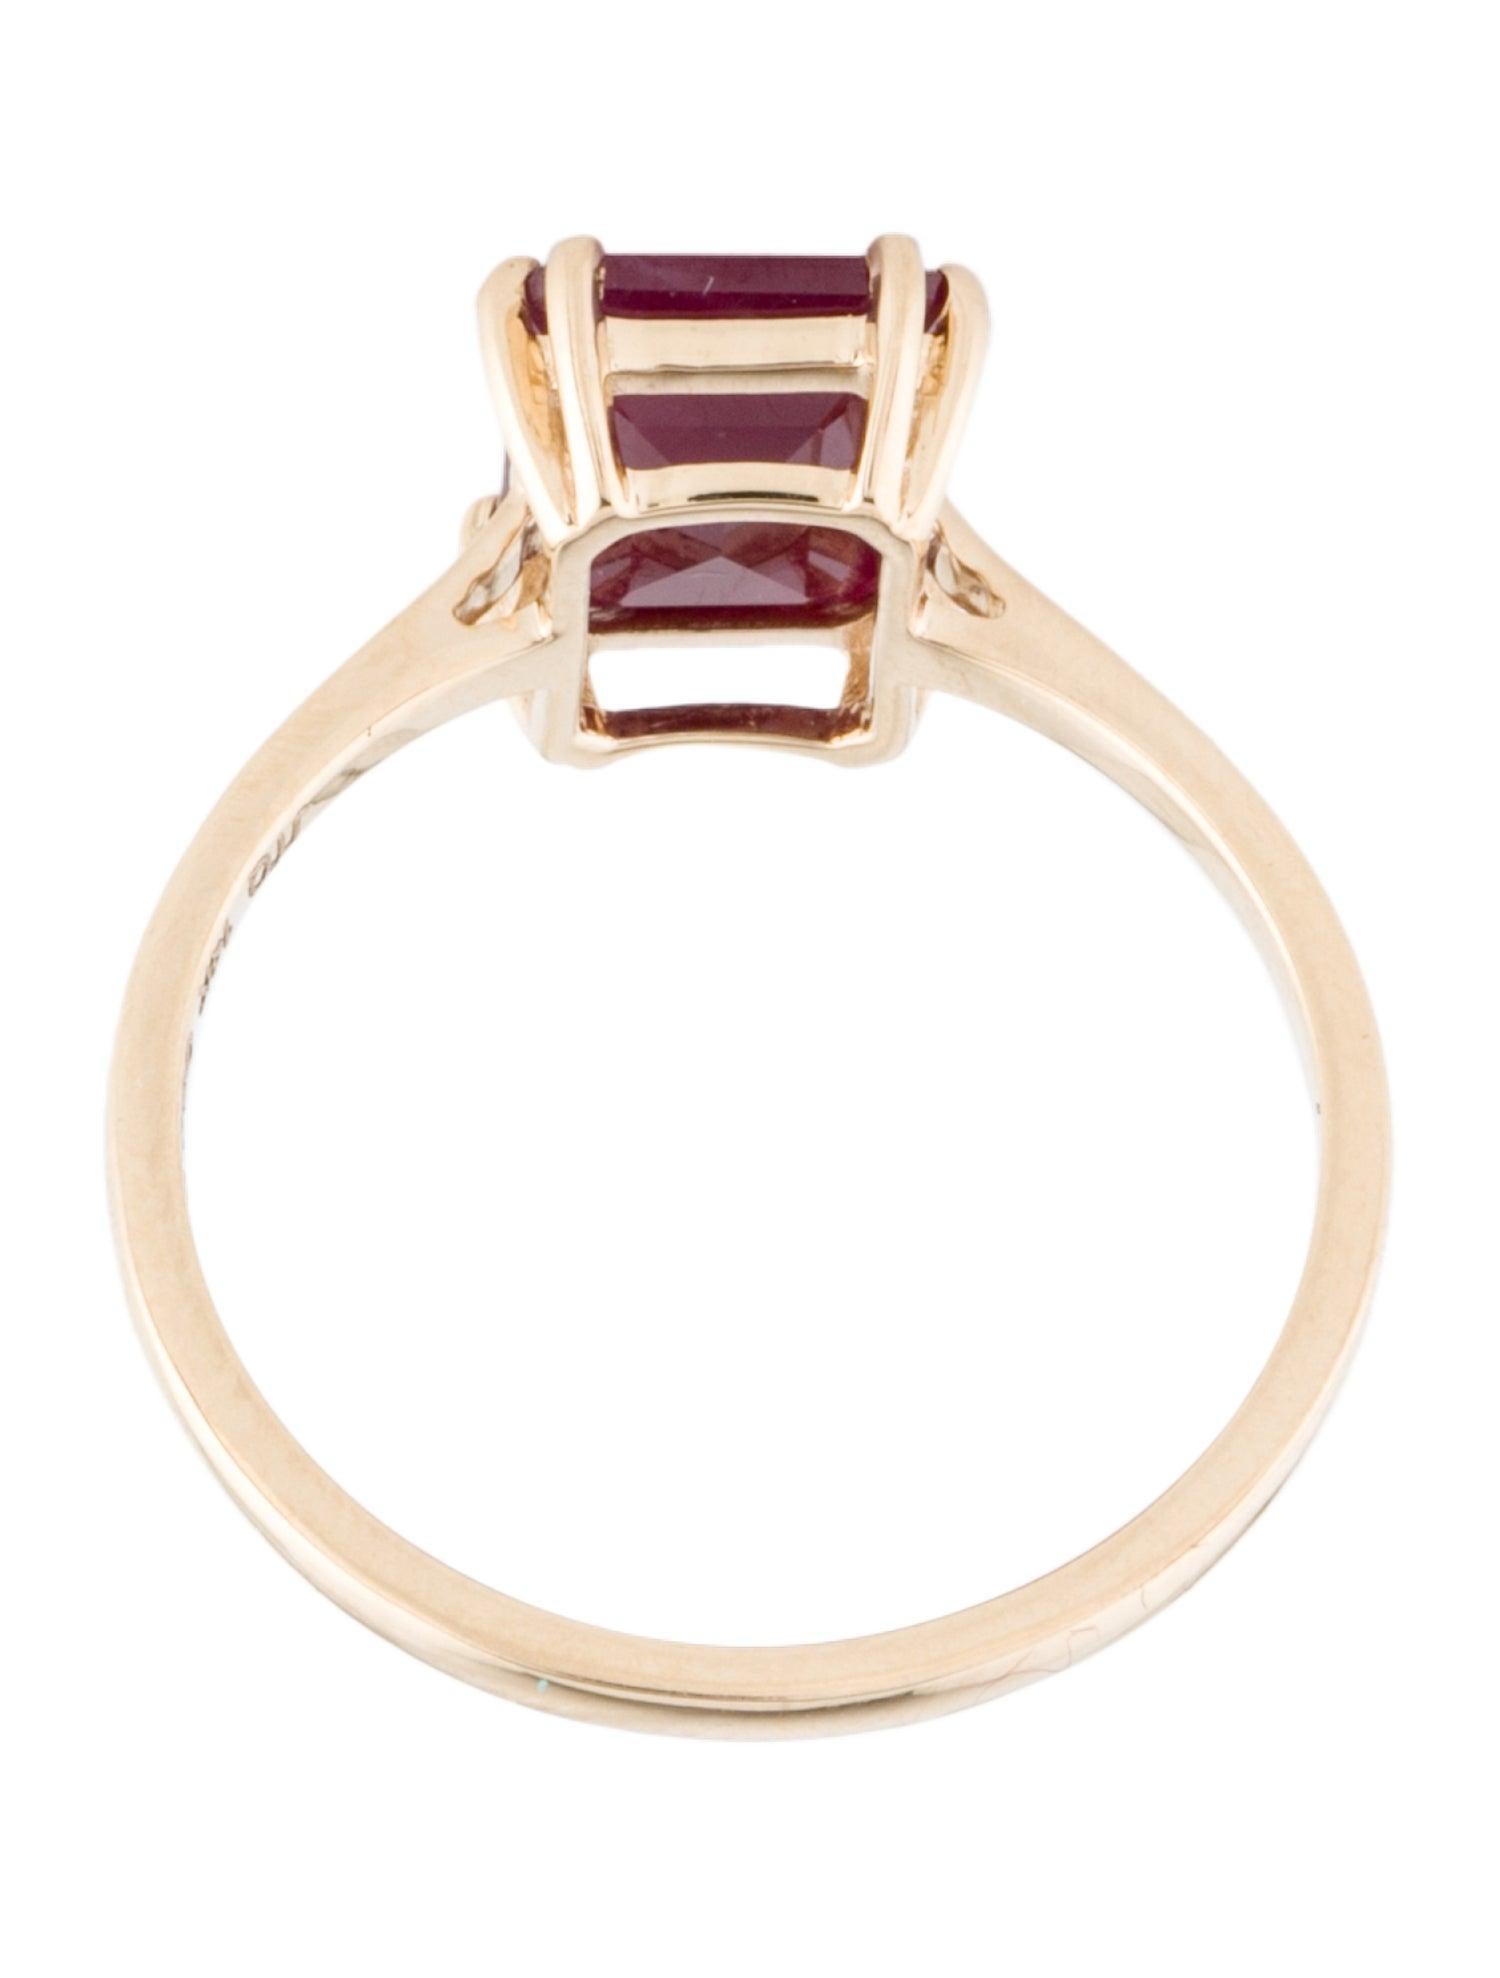 Captivating 14K Gold 2.02ct Ruby Cocktail Ring - Size 7 - Fine Gemstone Jewelry In New Condition For Sale In Holtsville, NY